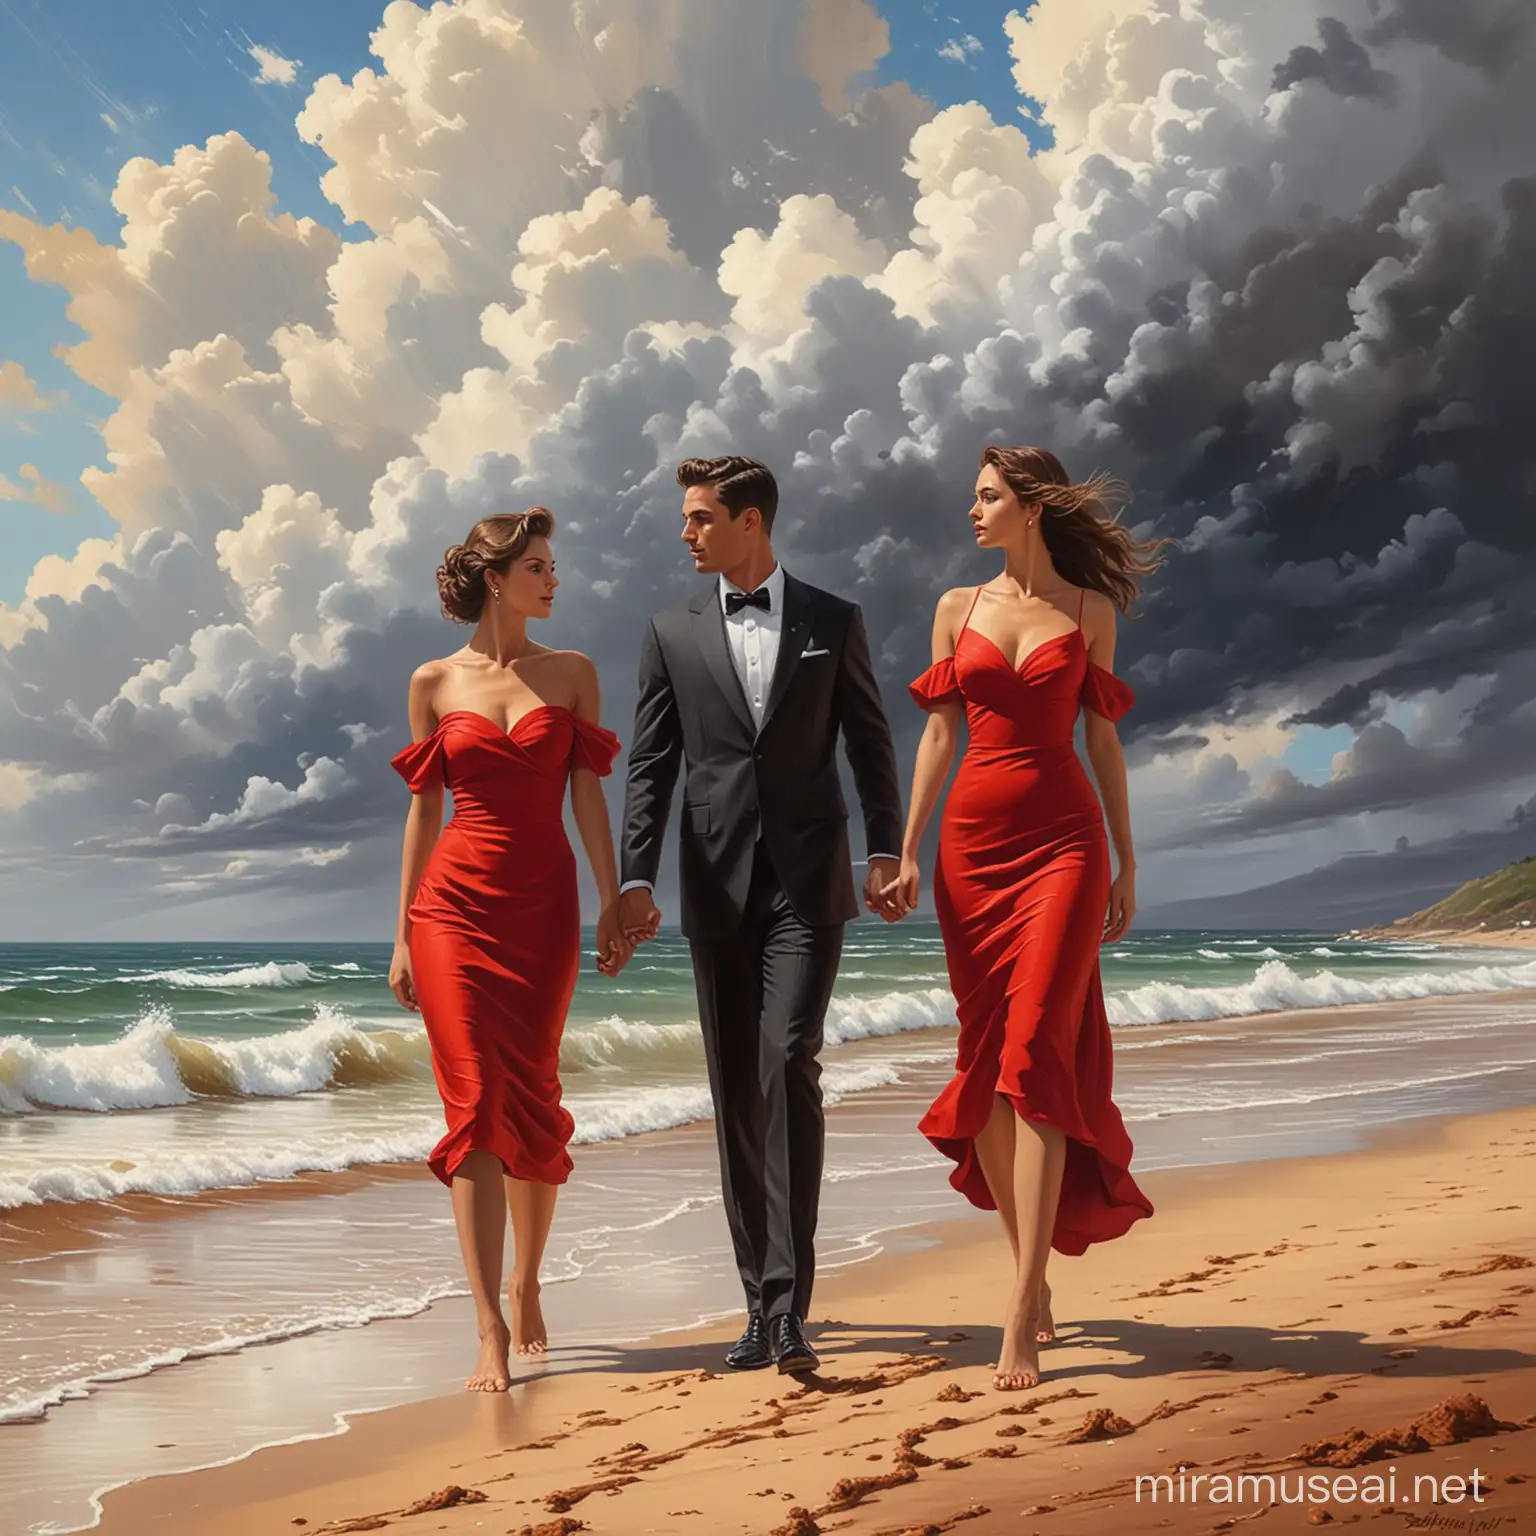 Oil painting men and women at the beach with brown sand waiting and expecting something or someone showing with finger in the distance, dressed in elegant outfit, red dress, black suit, windy, moist, beautiful clouds 